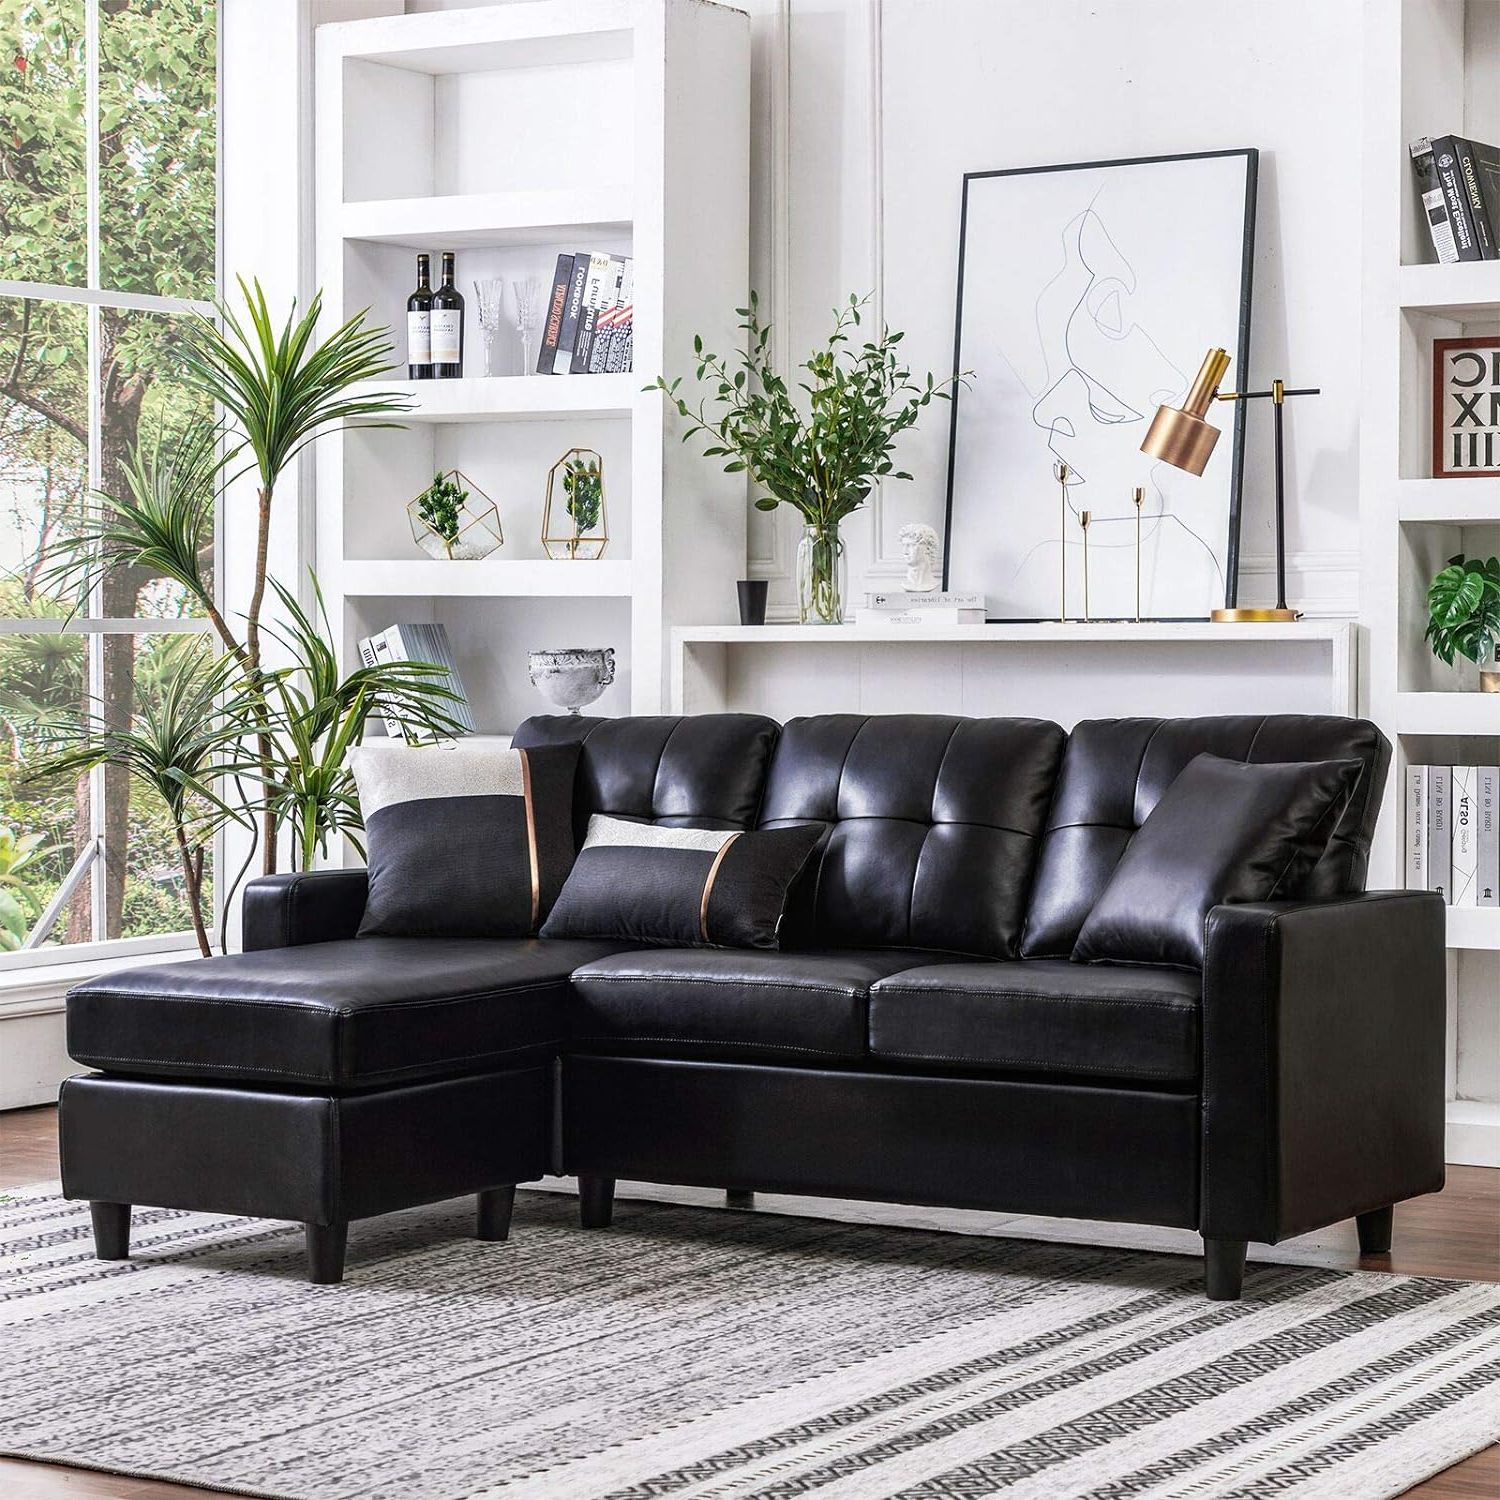 Preferred Sofas For Living Rooms Throughout 5 Best Leather Sofa Set For Living Room – Costculator (View 14 of 15)